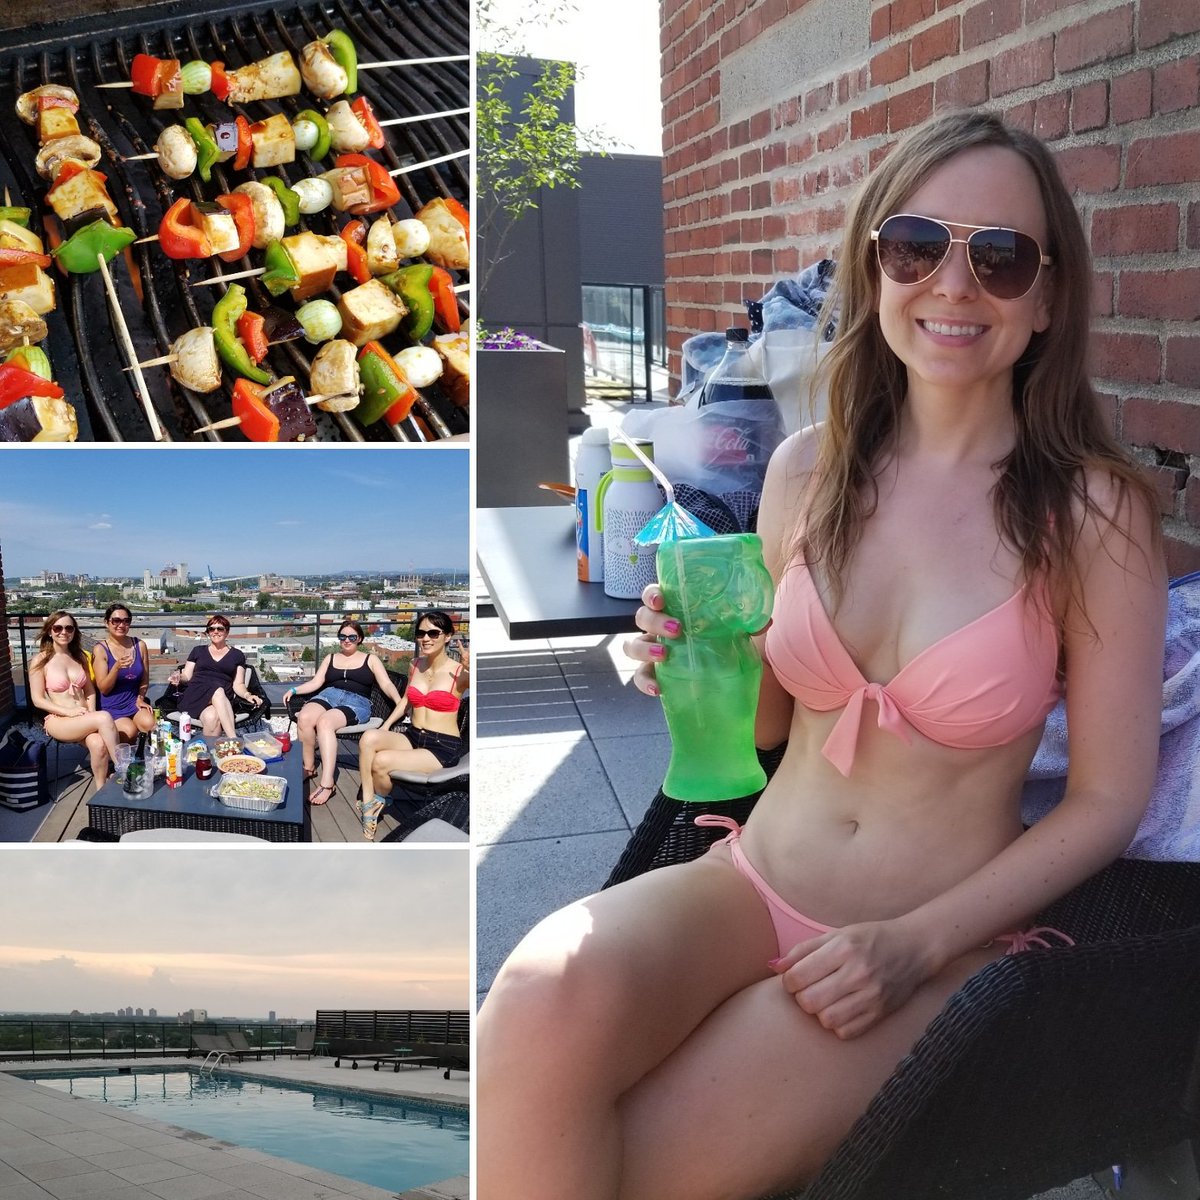 🌞👙 Had such a great day at a #poolparty! 💖🌞

#montreal #friends #bikini #summer #montrealgirls #rooftopterrace #bbq